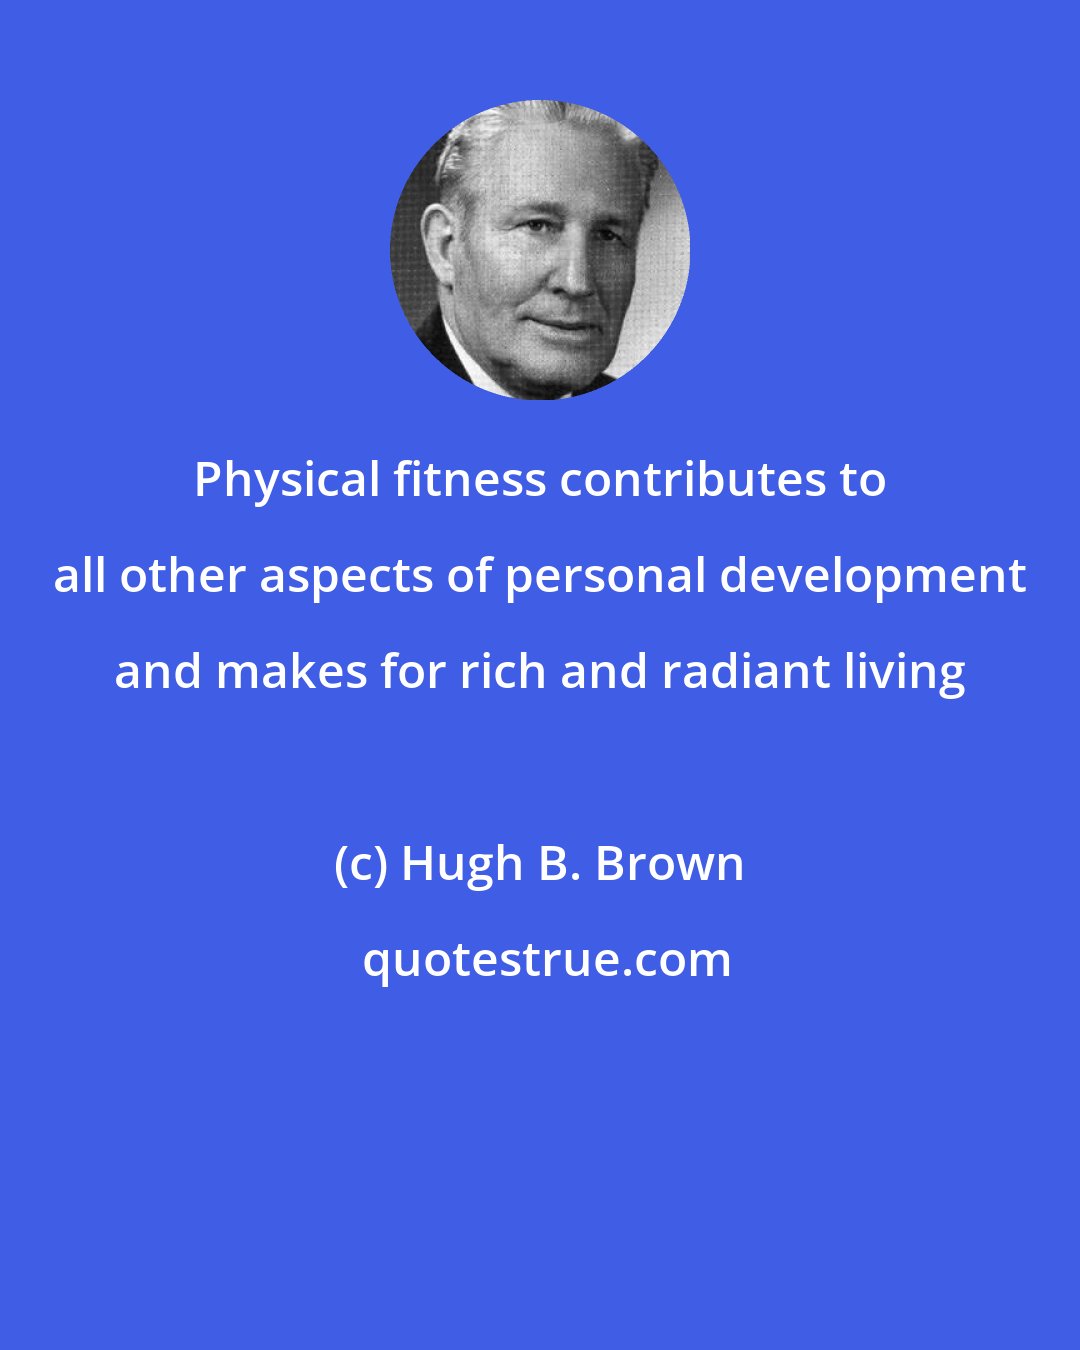 Hugh B. Brown: Physical fitness contributes to all other aspects of personal development and makes for rich and radiant living